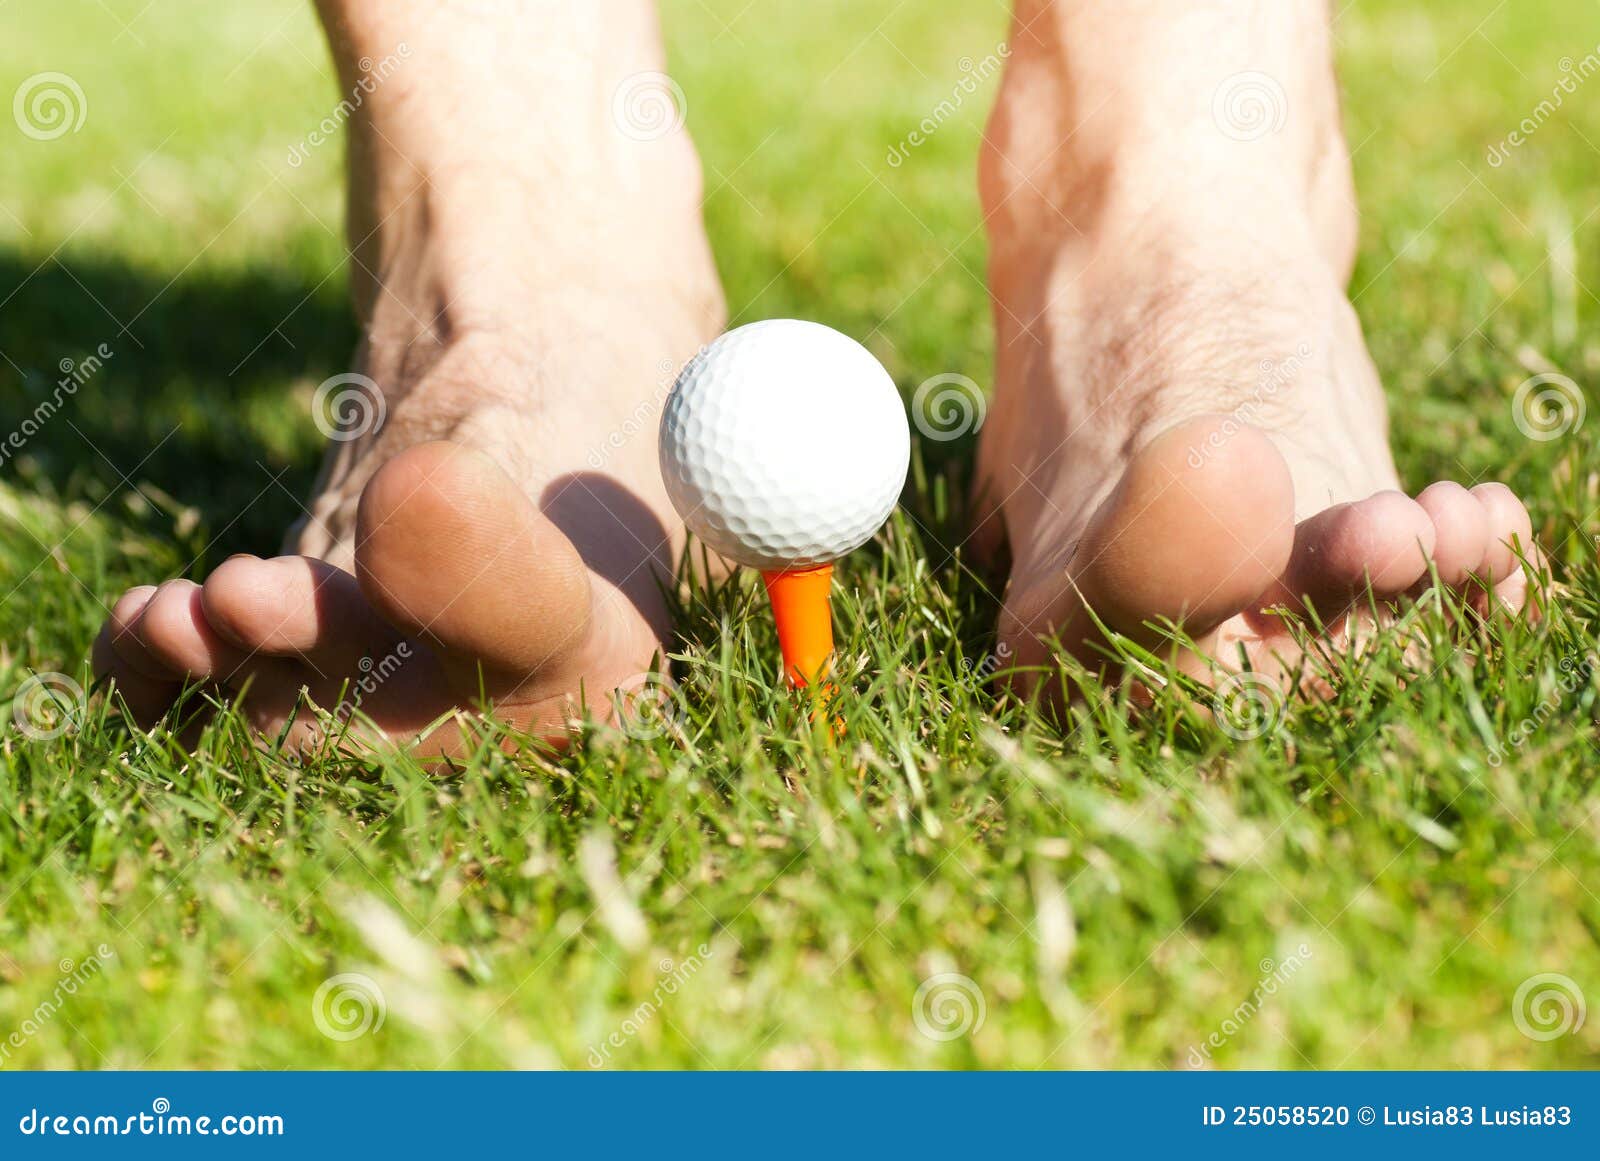 Male Feet Playing with Golf Ball Stock Photo Image of healthy, clouds